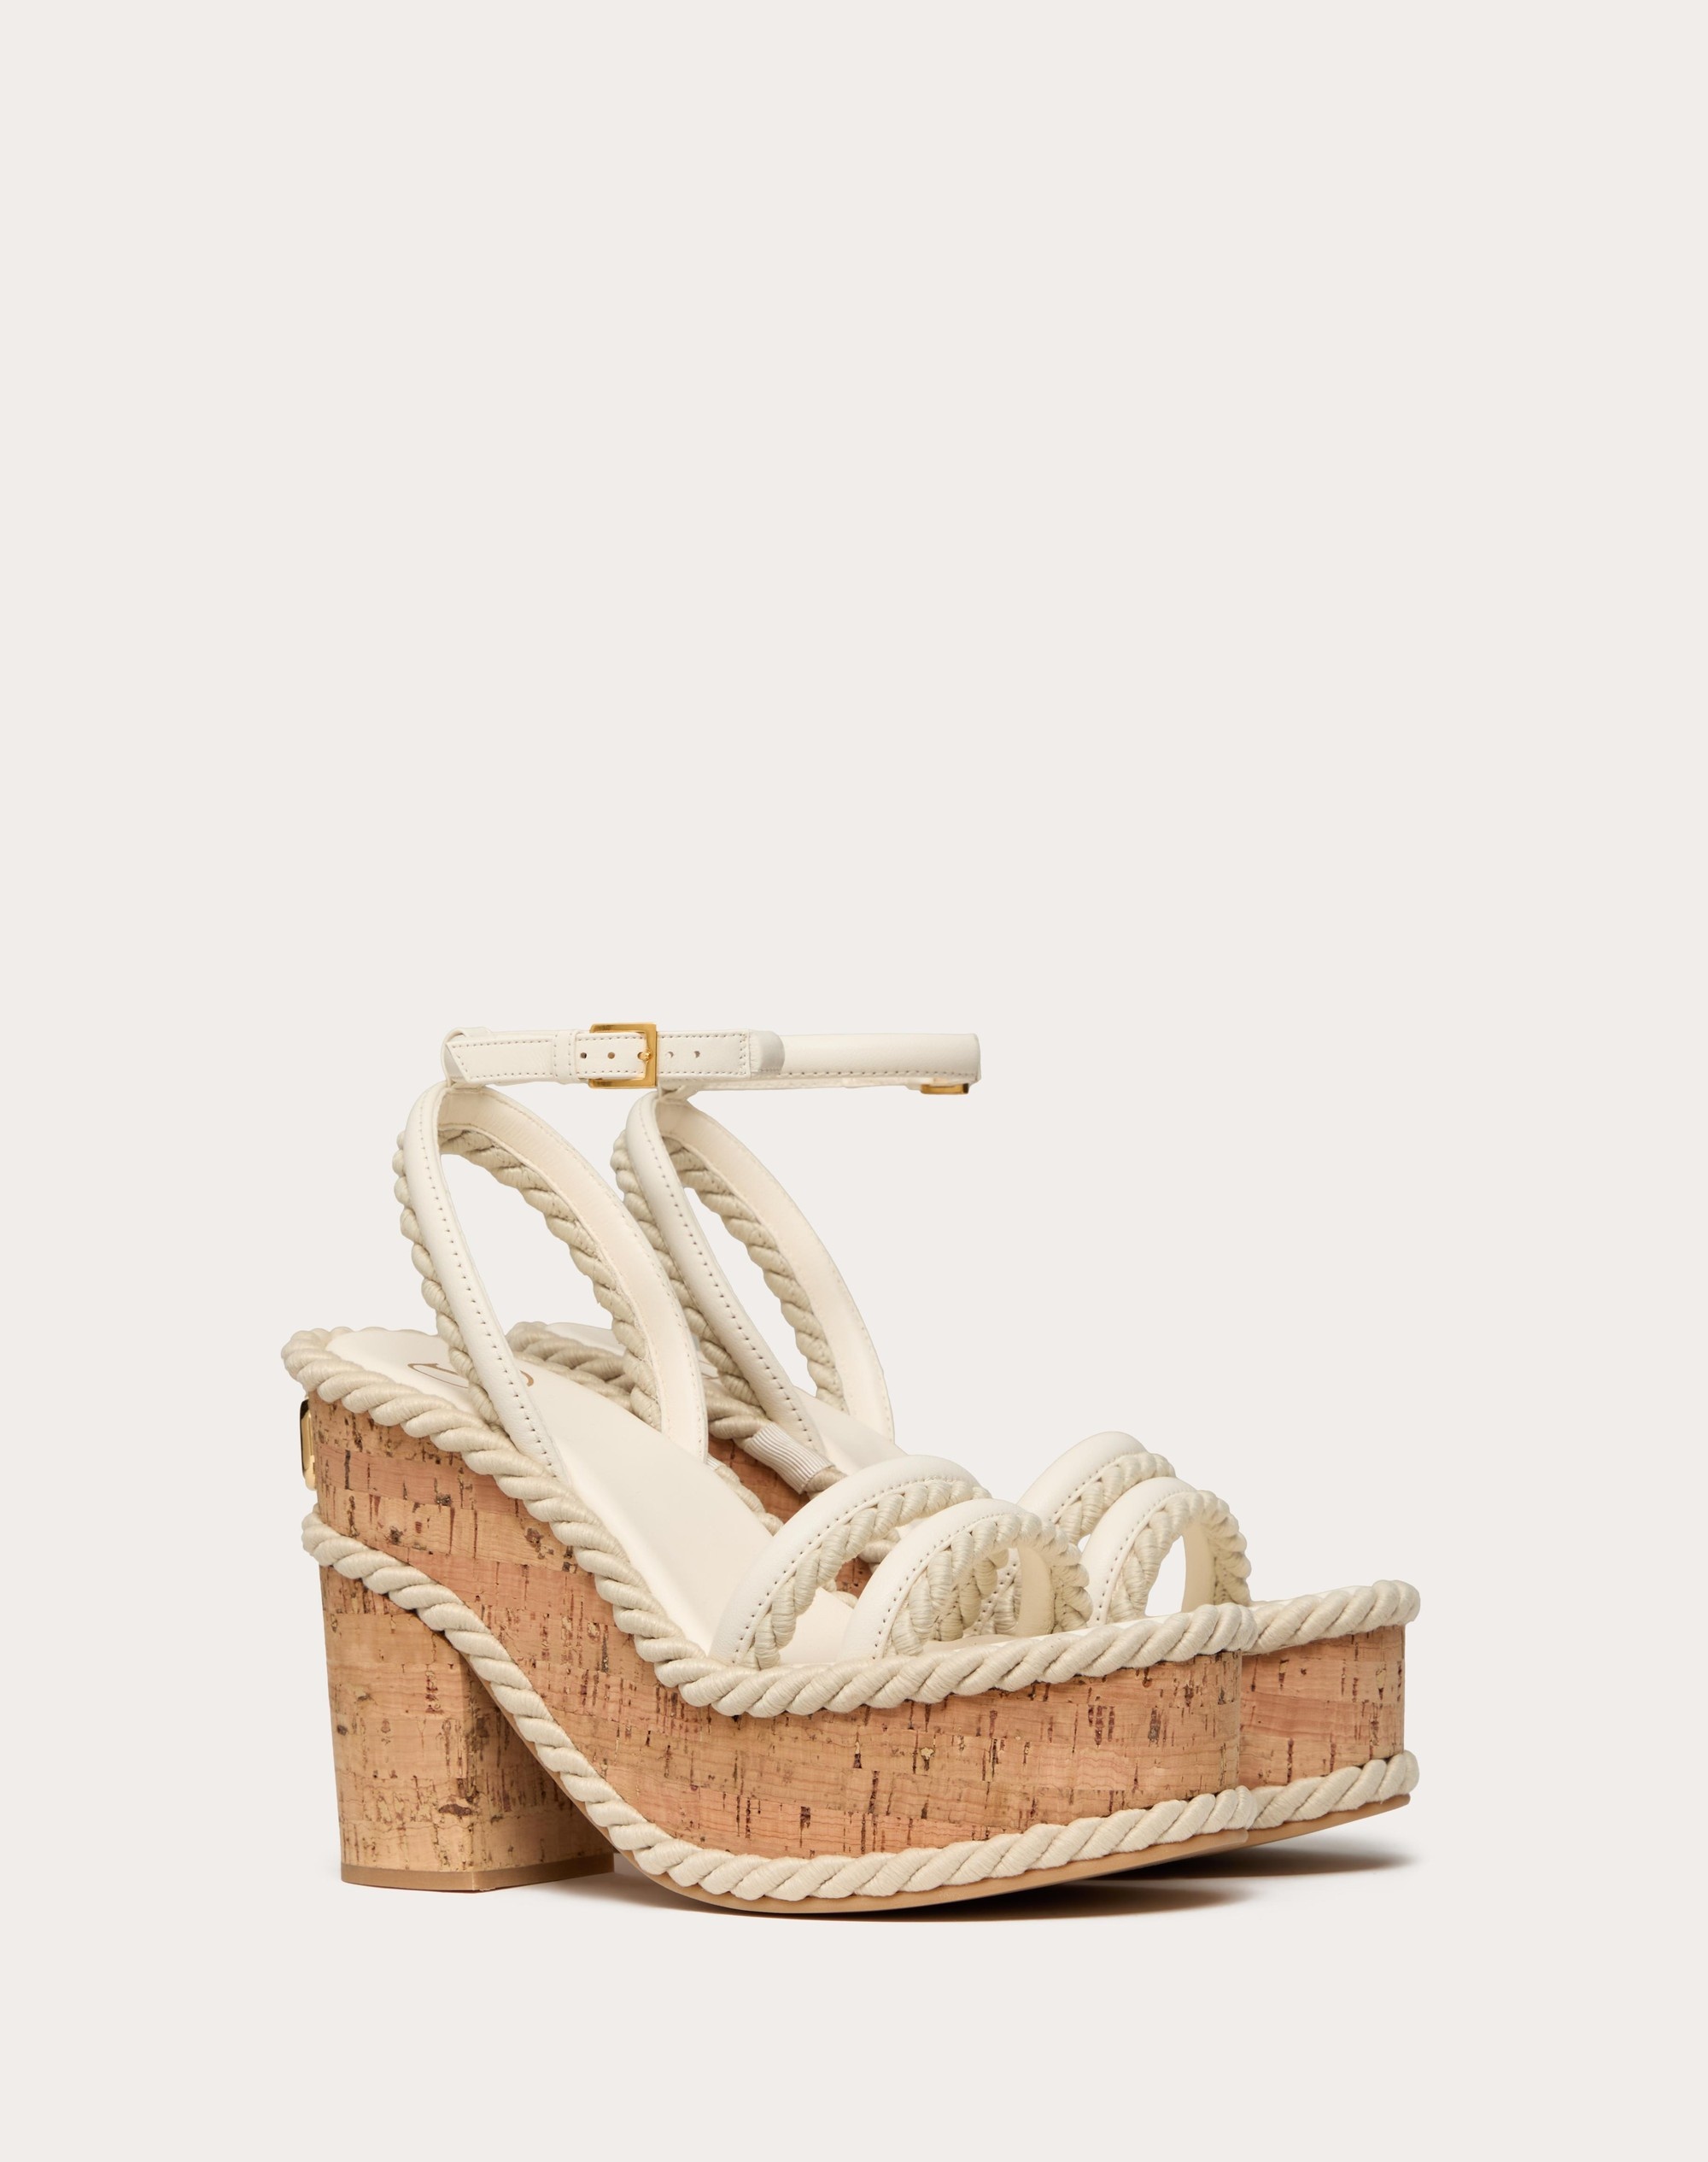 VLOGO SUMMERBLOCKS WEDGE SANDAL IN NAPPA LEATHER AND ROPE TORCHON 130MM - 2